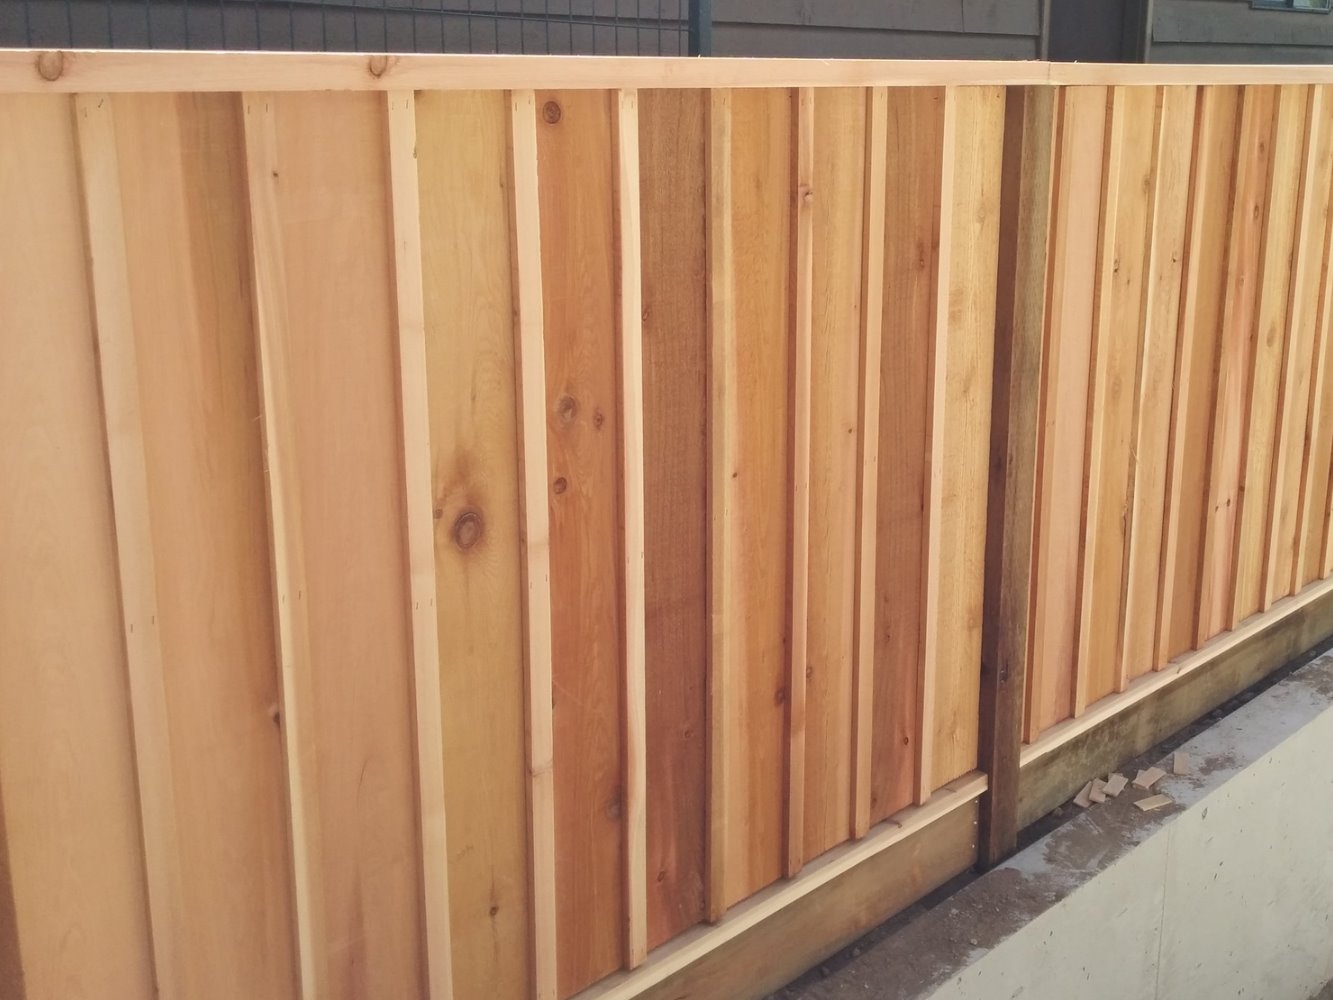 Earlville New York privacy fencing